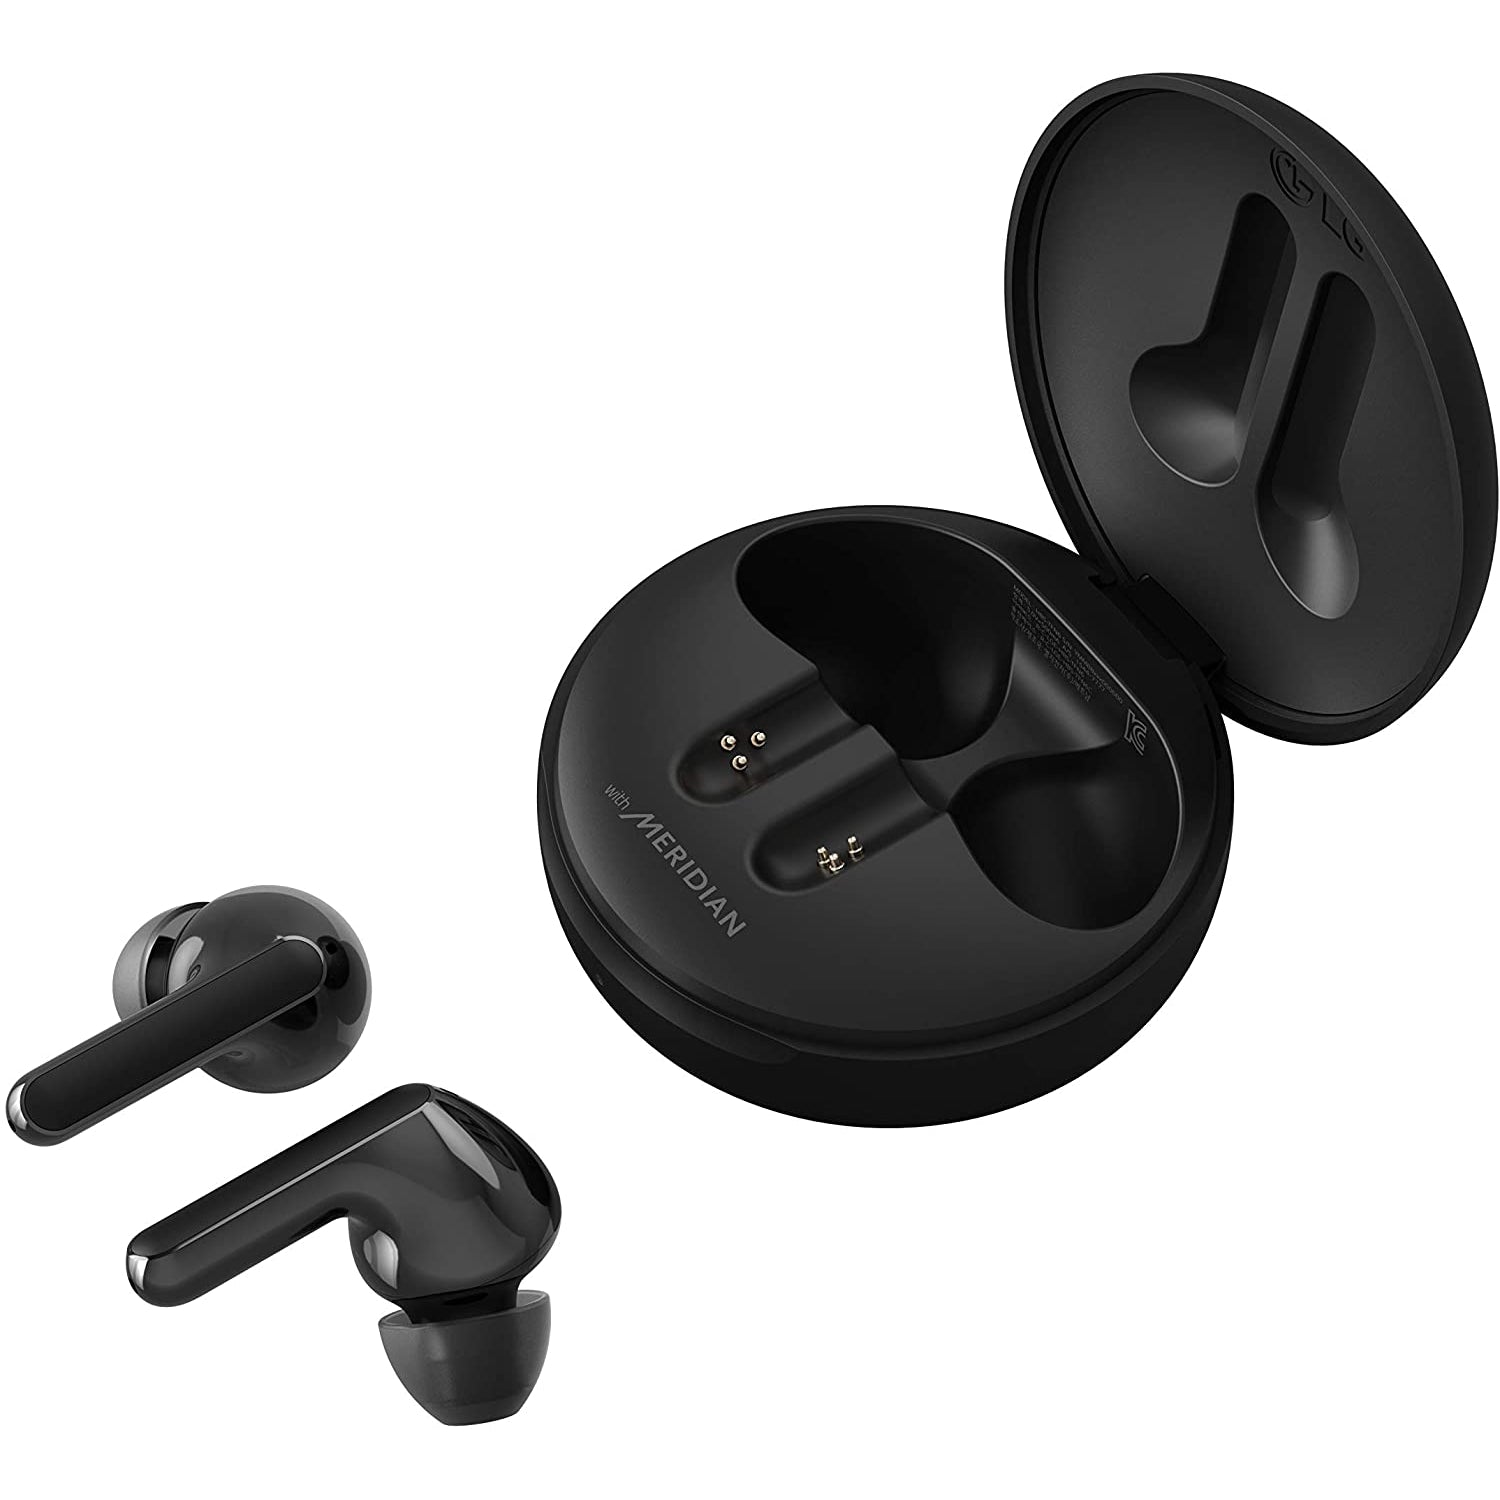 LG TONE Free HBS-FN6 True Wireless Bluetooth Earbuds - Refurbished Excellent